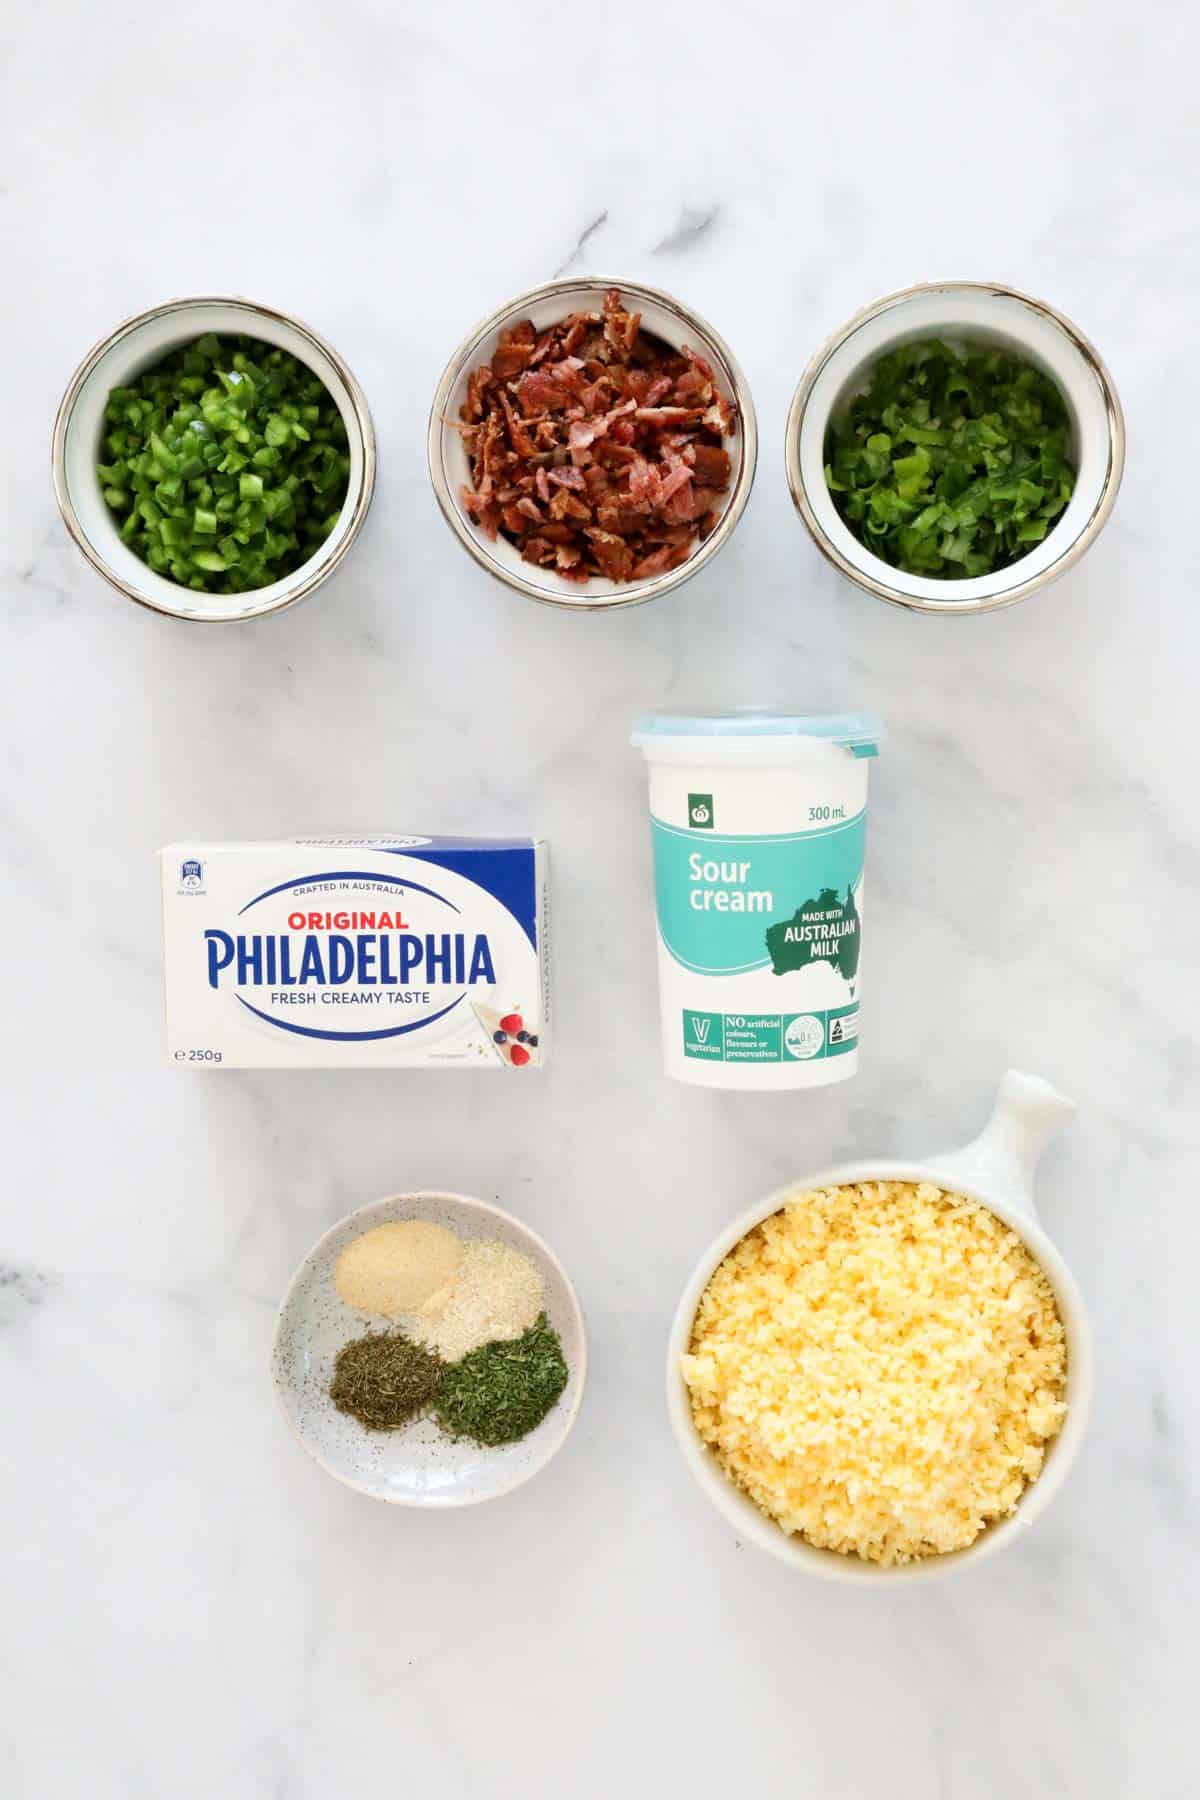 Jalapeno cheese ball ingredients measured and placed into individual bowls.